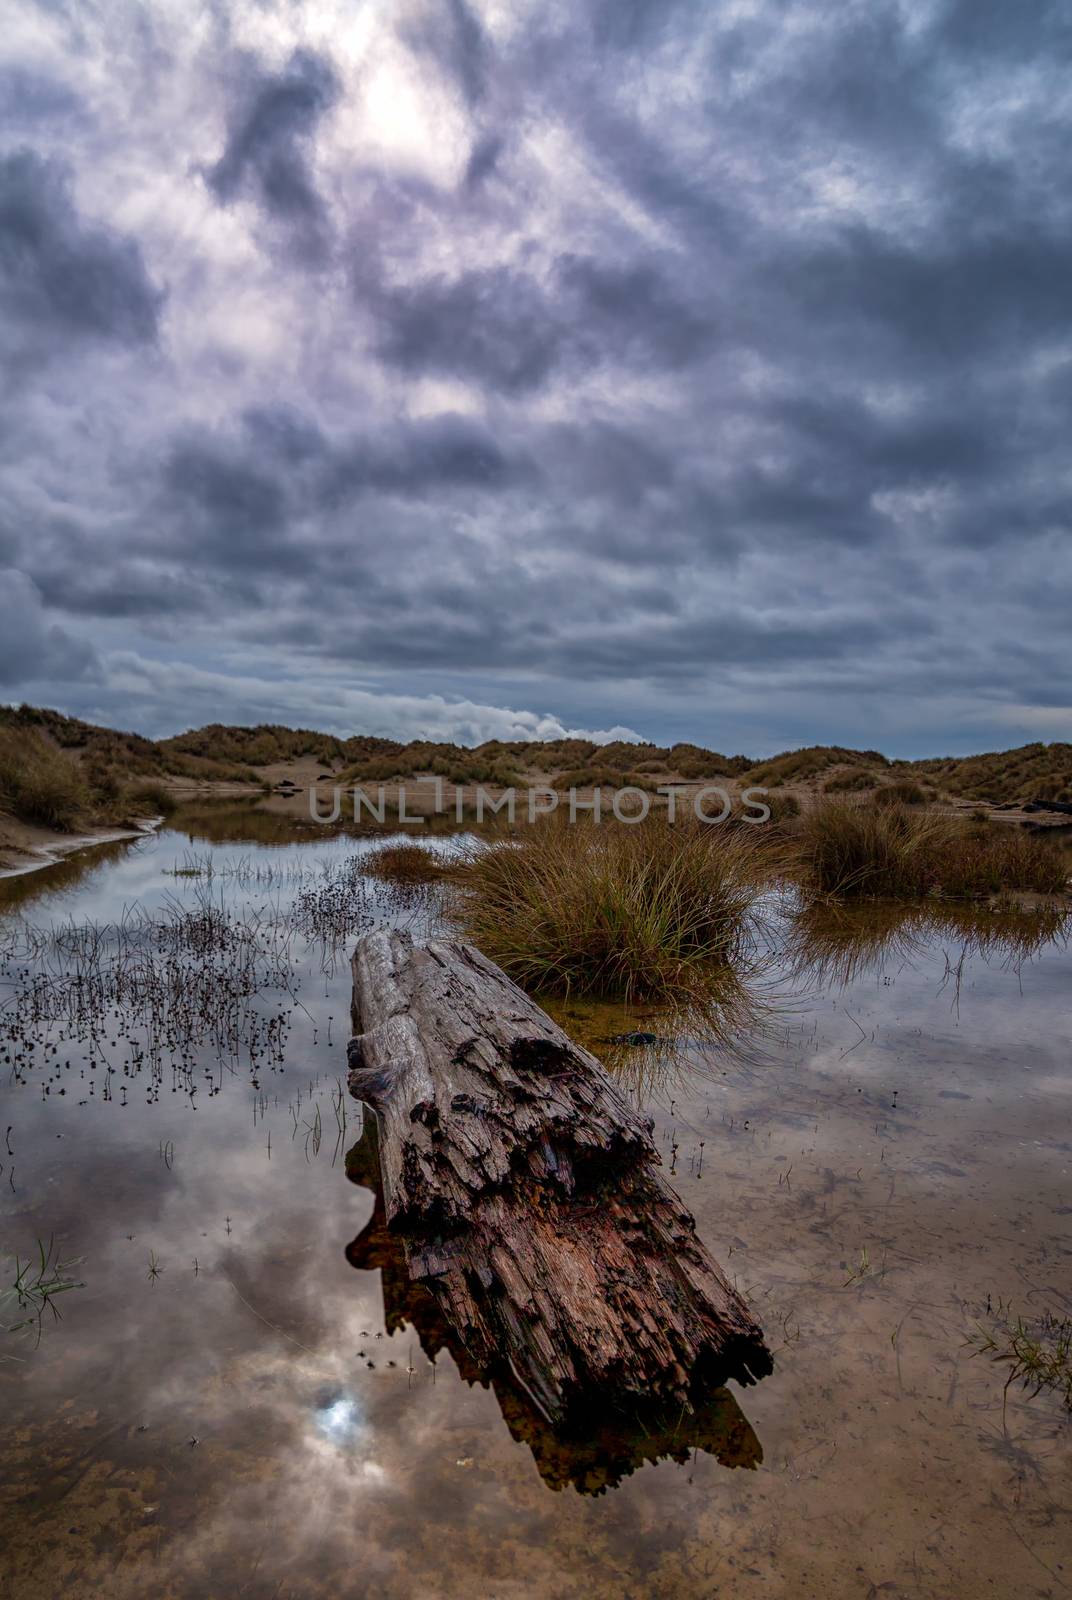 Reflections in a Rainwater Pond, Sand Dunes, Oregon, USA by backyard_photography